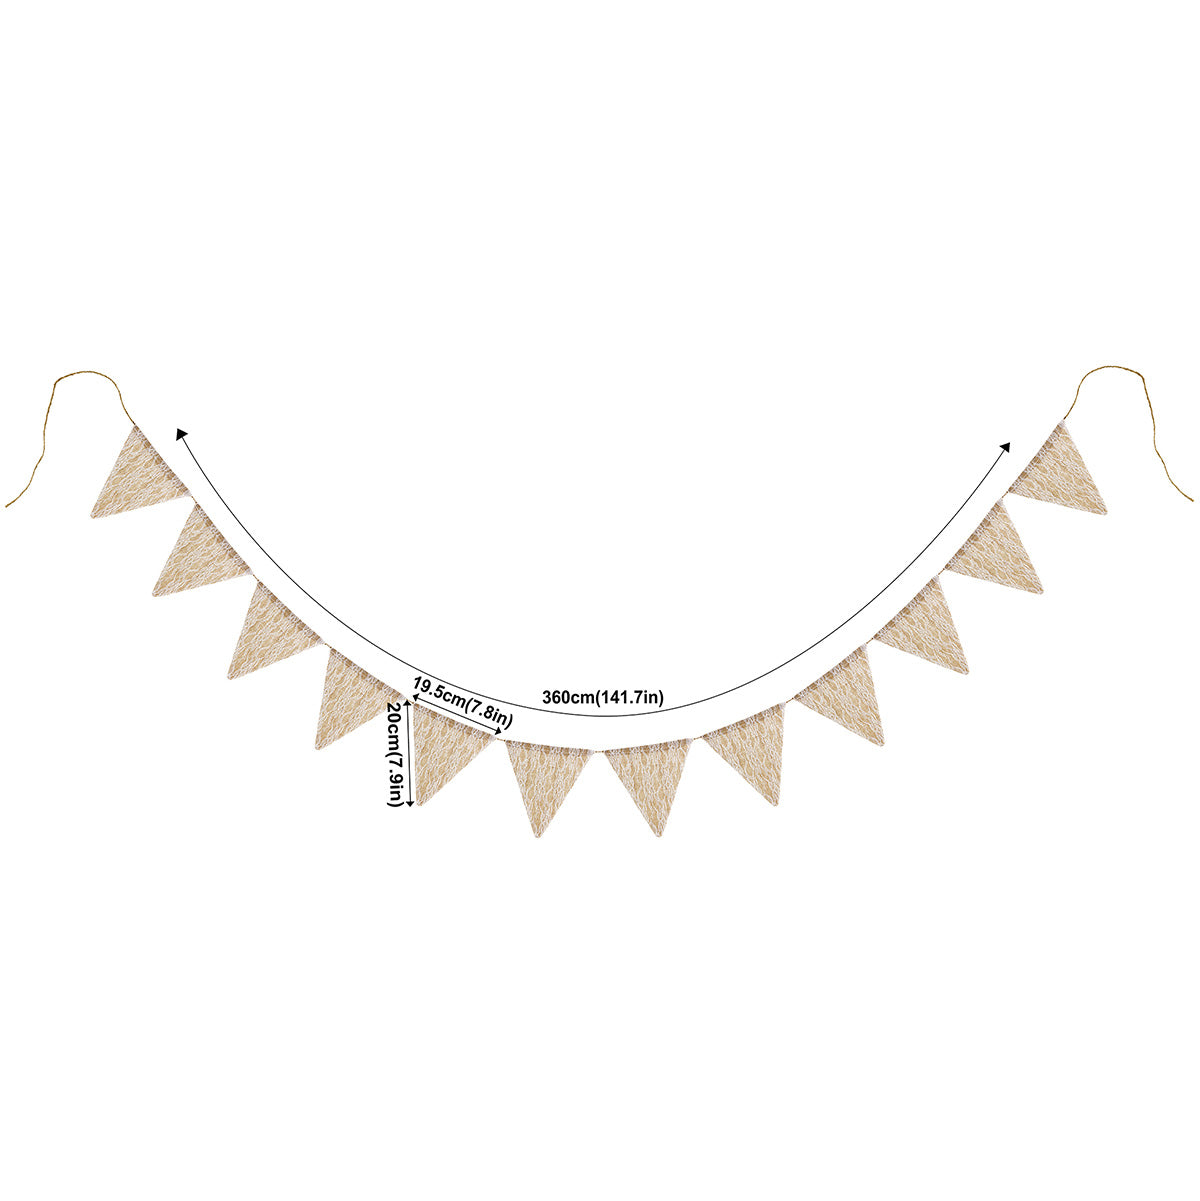 Burlap with Lace Pennant Banner